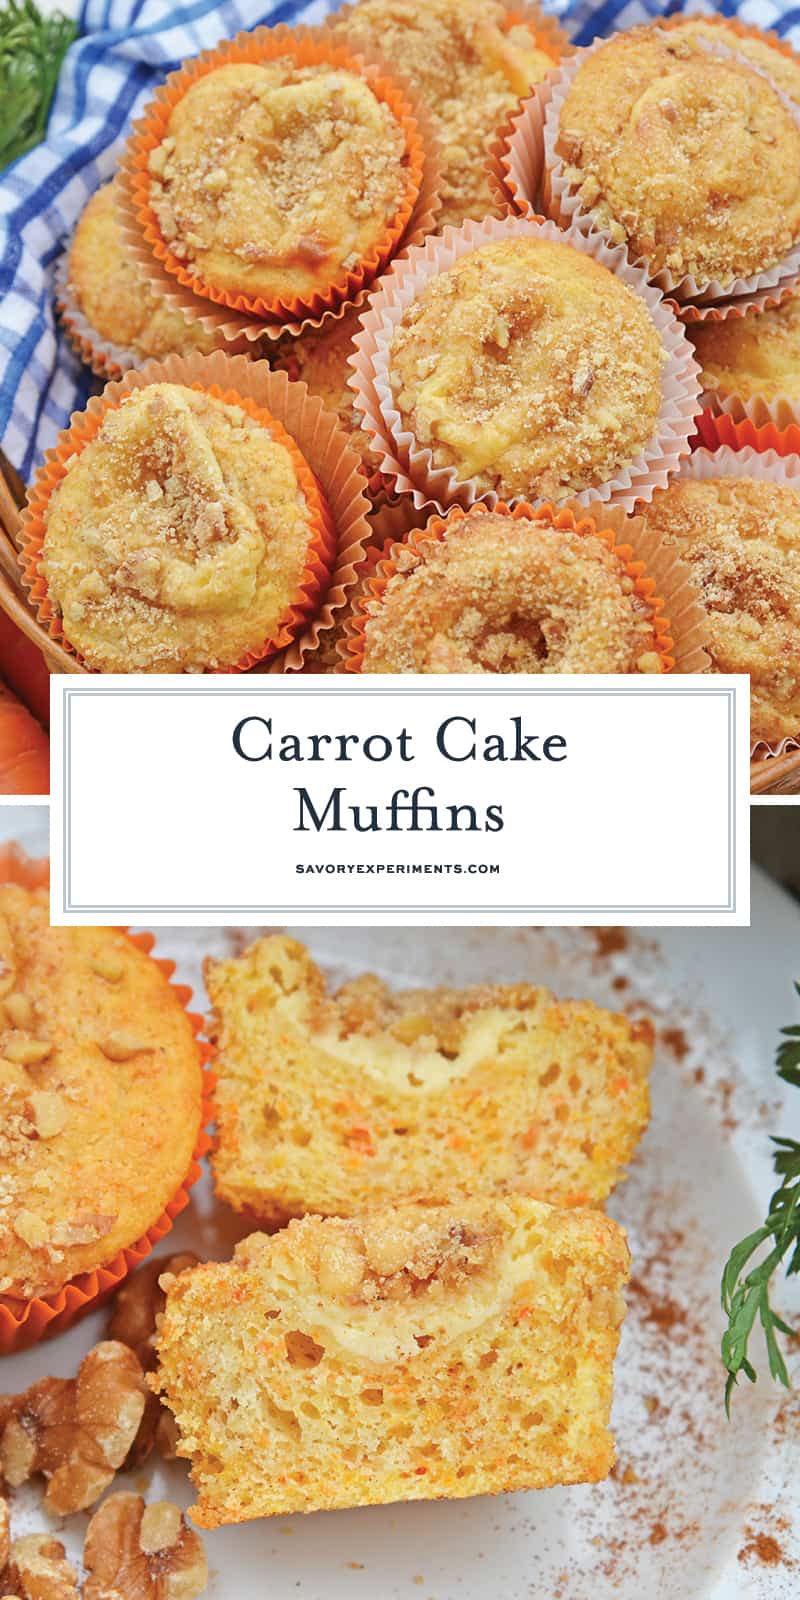 Carrot Cake Muffins are muffins loaded with carrots and stuffed with cream cheese frosting. Perfect for breakfast, brunch or a snack. Also freezer-friendly!  #carrotcakemuffins www.savoryexperiments.com 